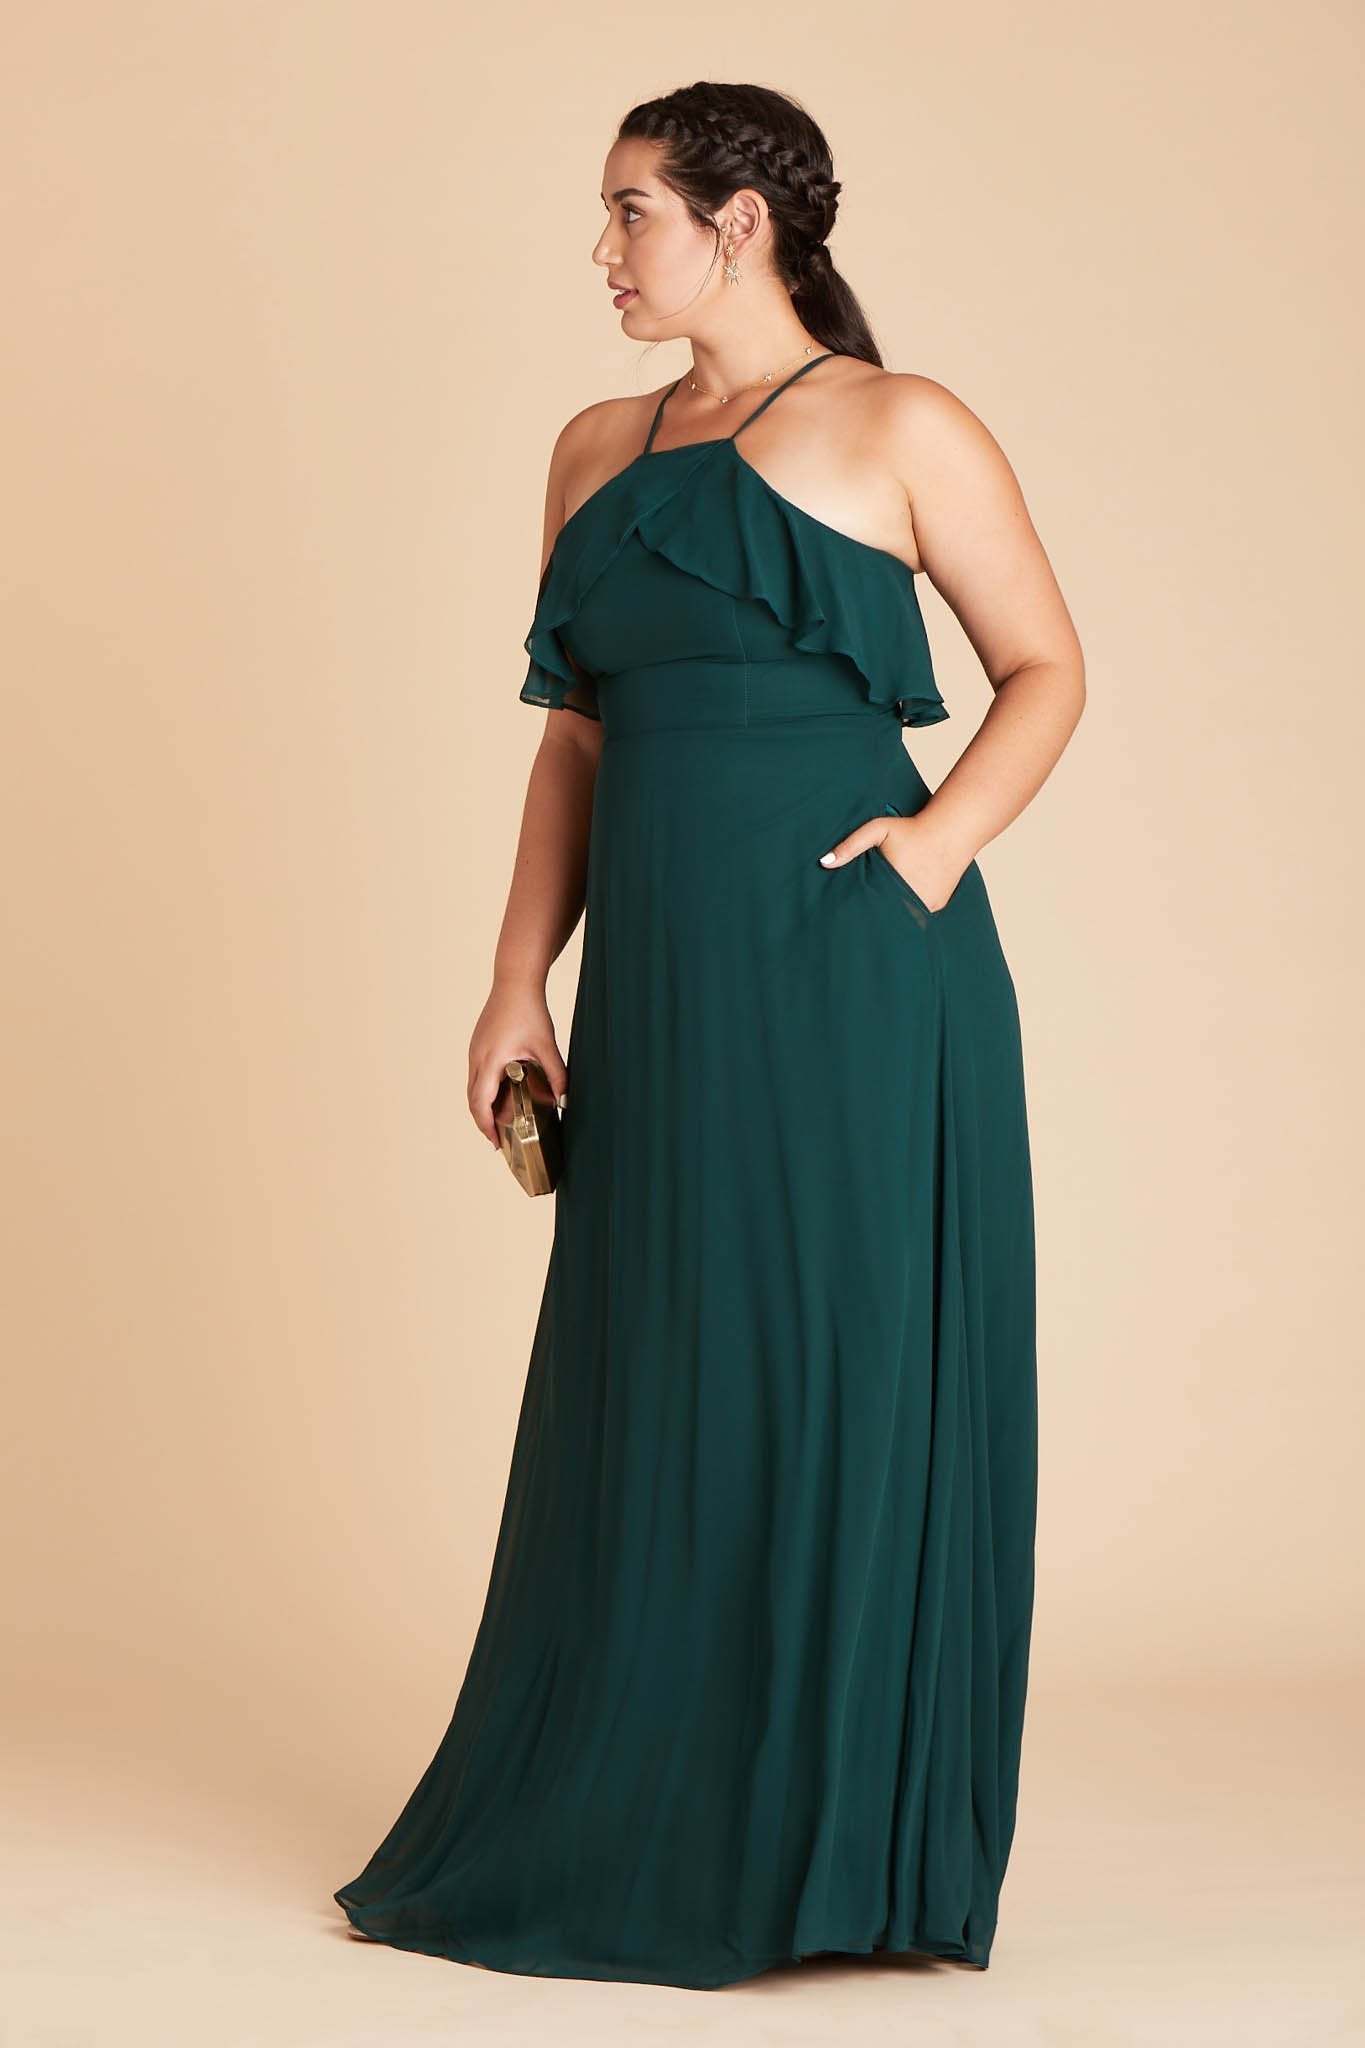 Jules convertible plus size bridesmaid dress in emerald green chiffon by Birdy Grey, side view with hand in pocket